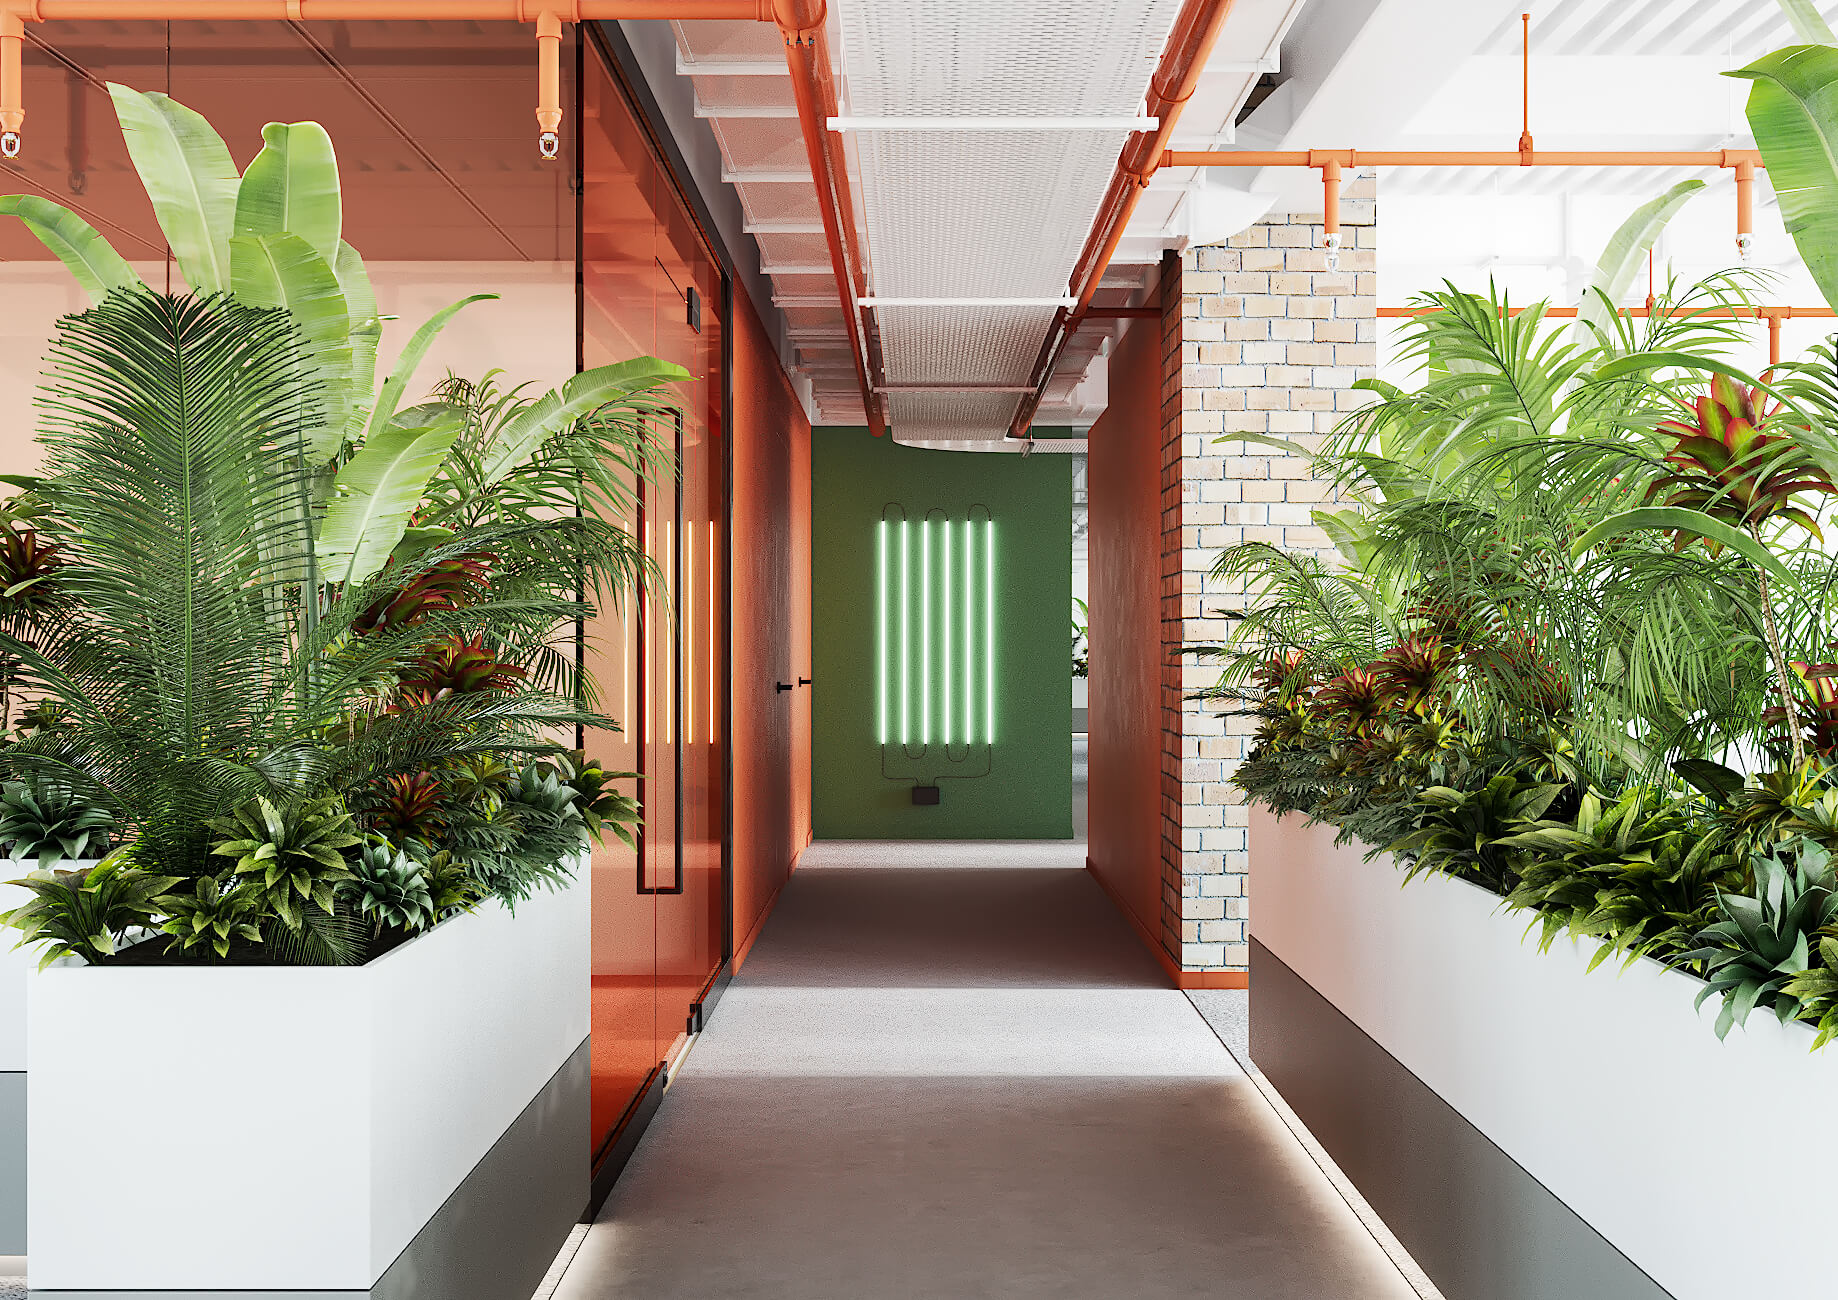 Design for Sustainable Development: How to Create an Eco-Friendly Office Space? 5